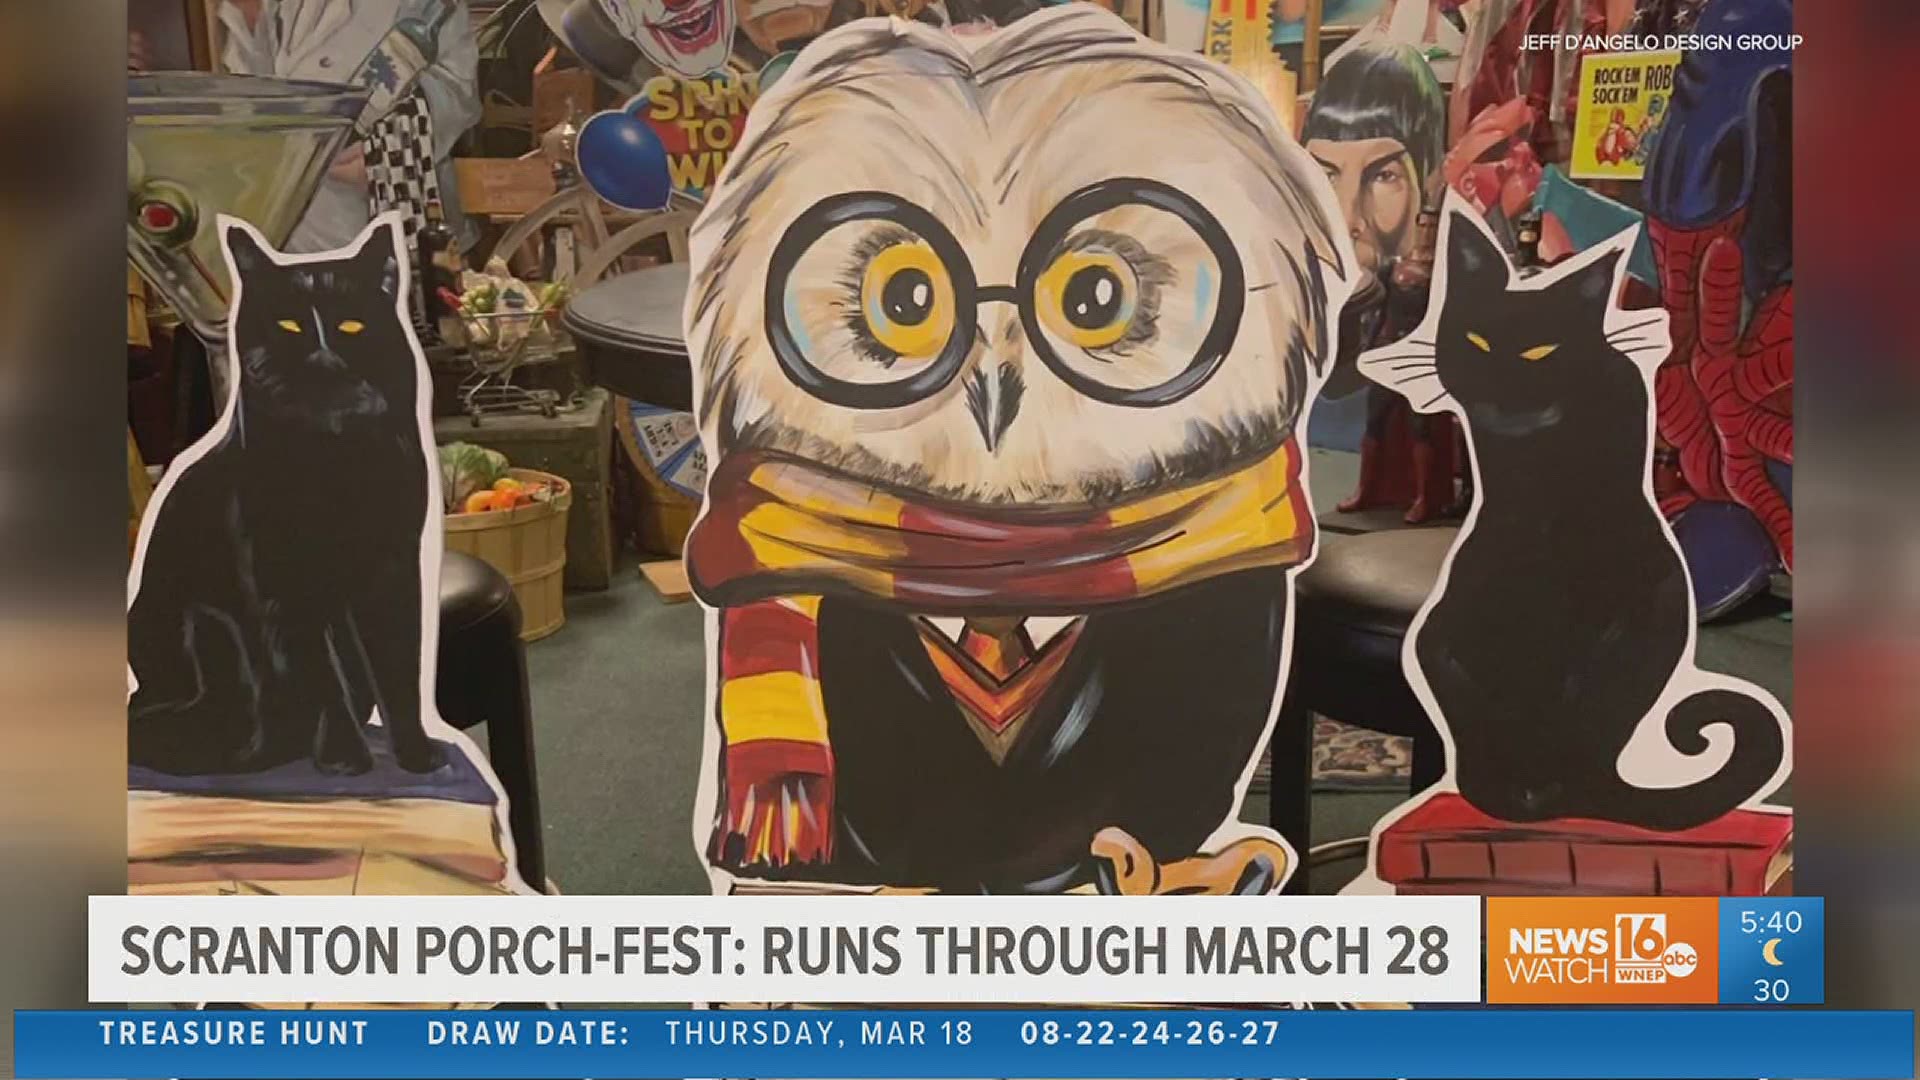 From a Harry Potter theme to Wizard of Oz, they are some of the sights you can soak in as part of the new "porch fest" event underway through March 28 in Scranton.